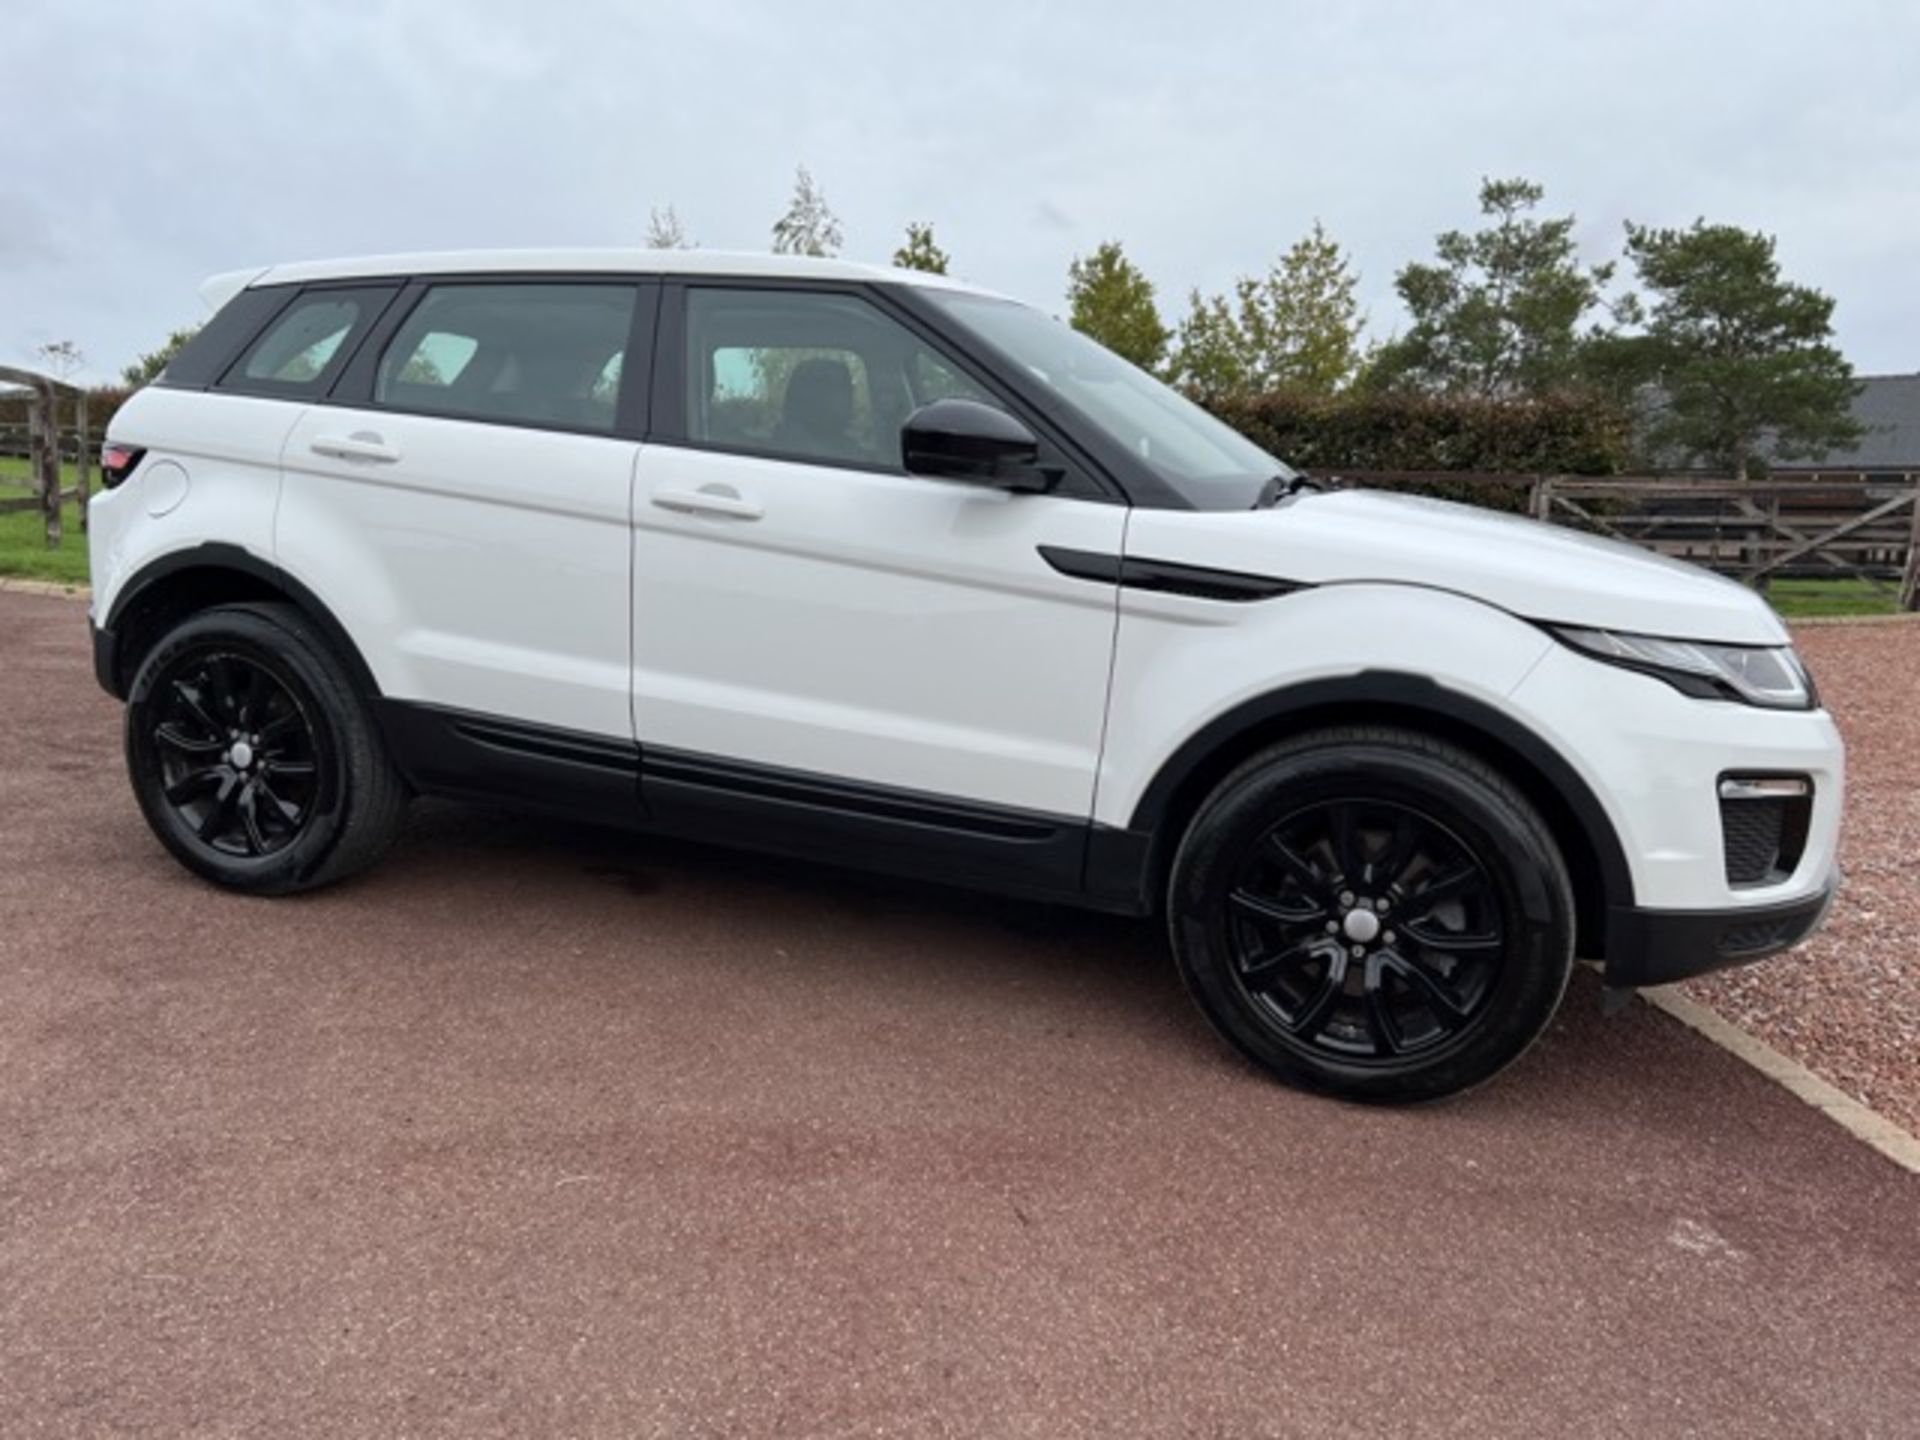 (RESERVE MET)LAND ROVER RANGE ROVER EVOQUE 2.0 TD4 SE Tech 5dr Automatic - 16 Reg - Air con - Image 2 of 12